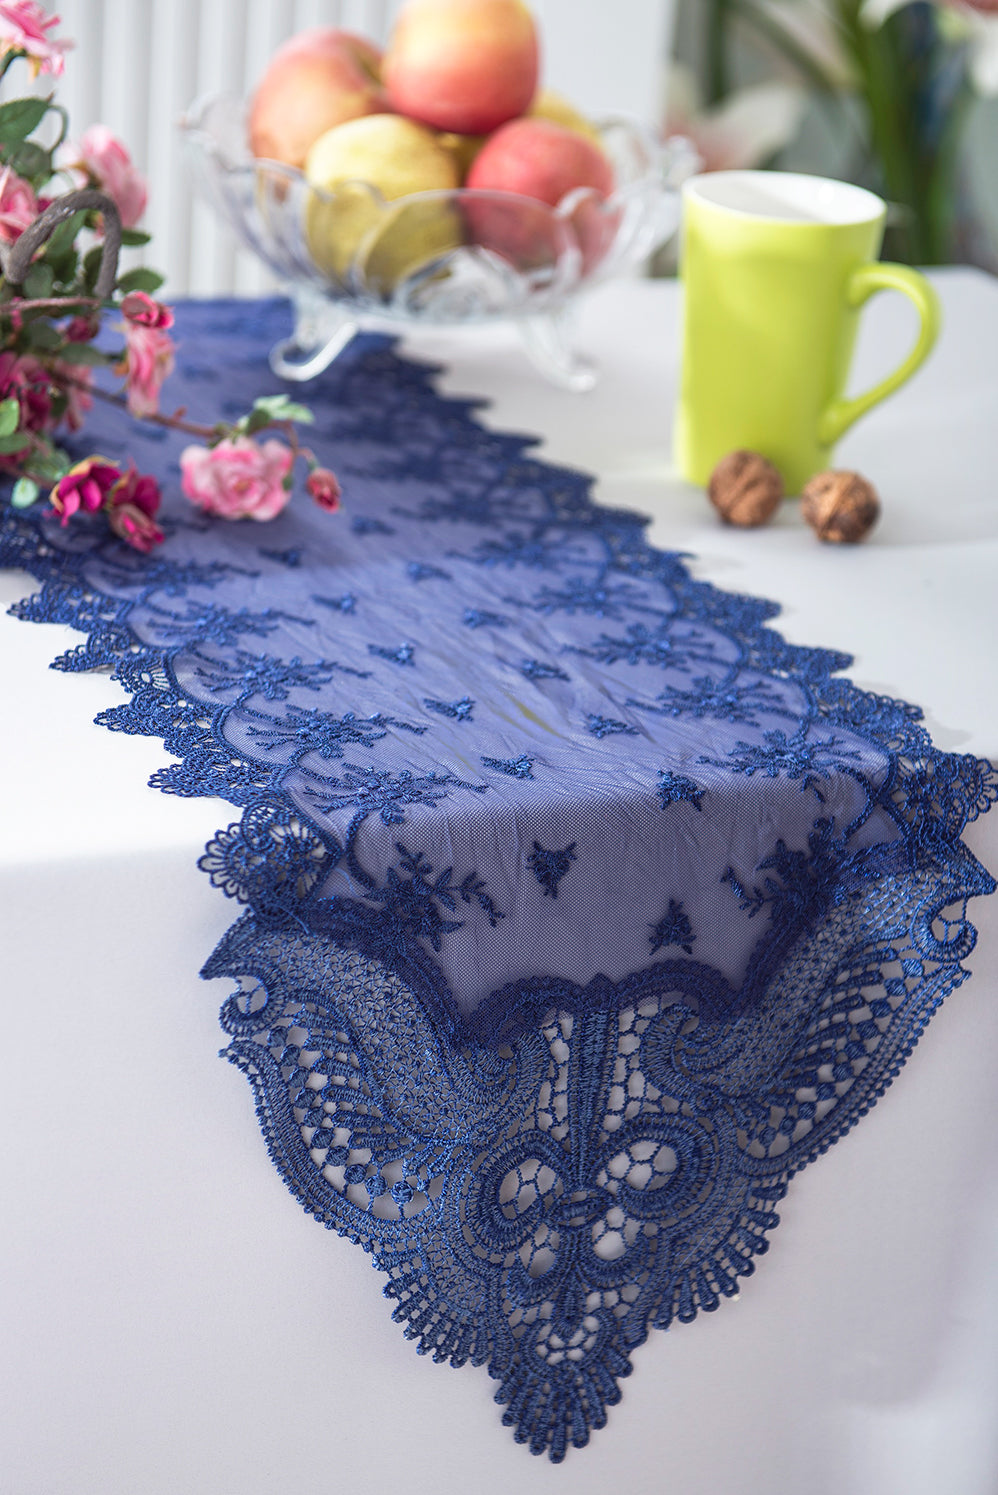 12"x108" Jasmine Raschel Lace Embroidered Table Runner - Navy Blue (1pc)